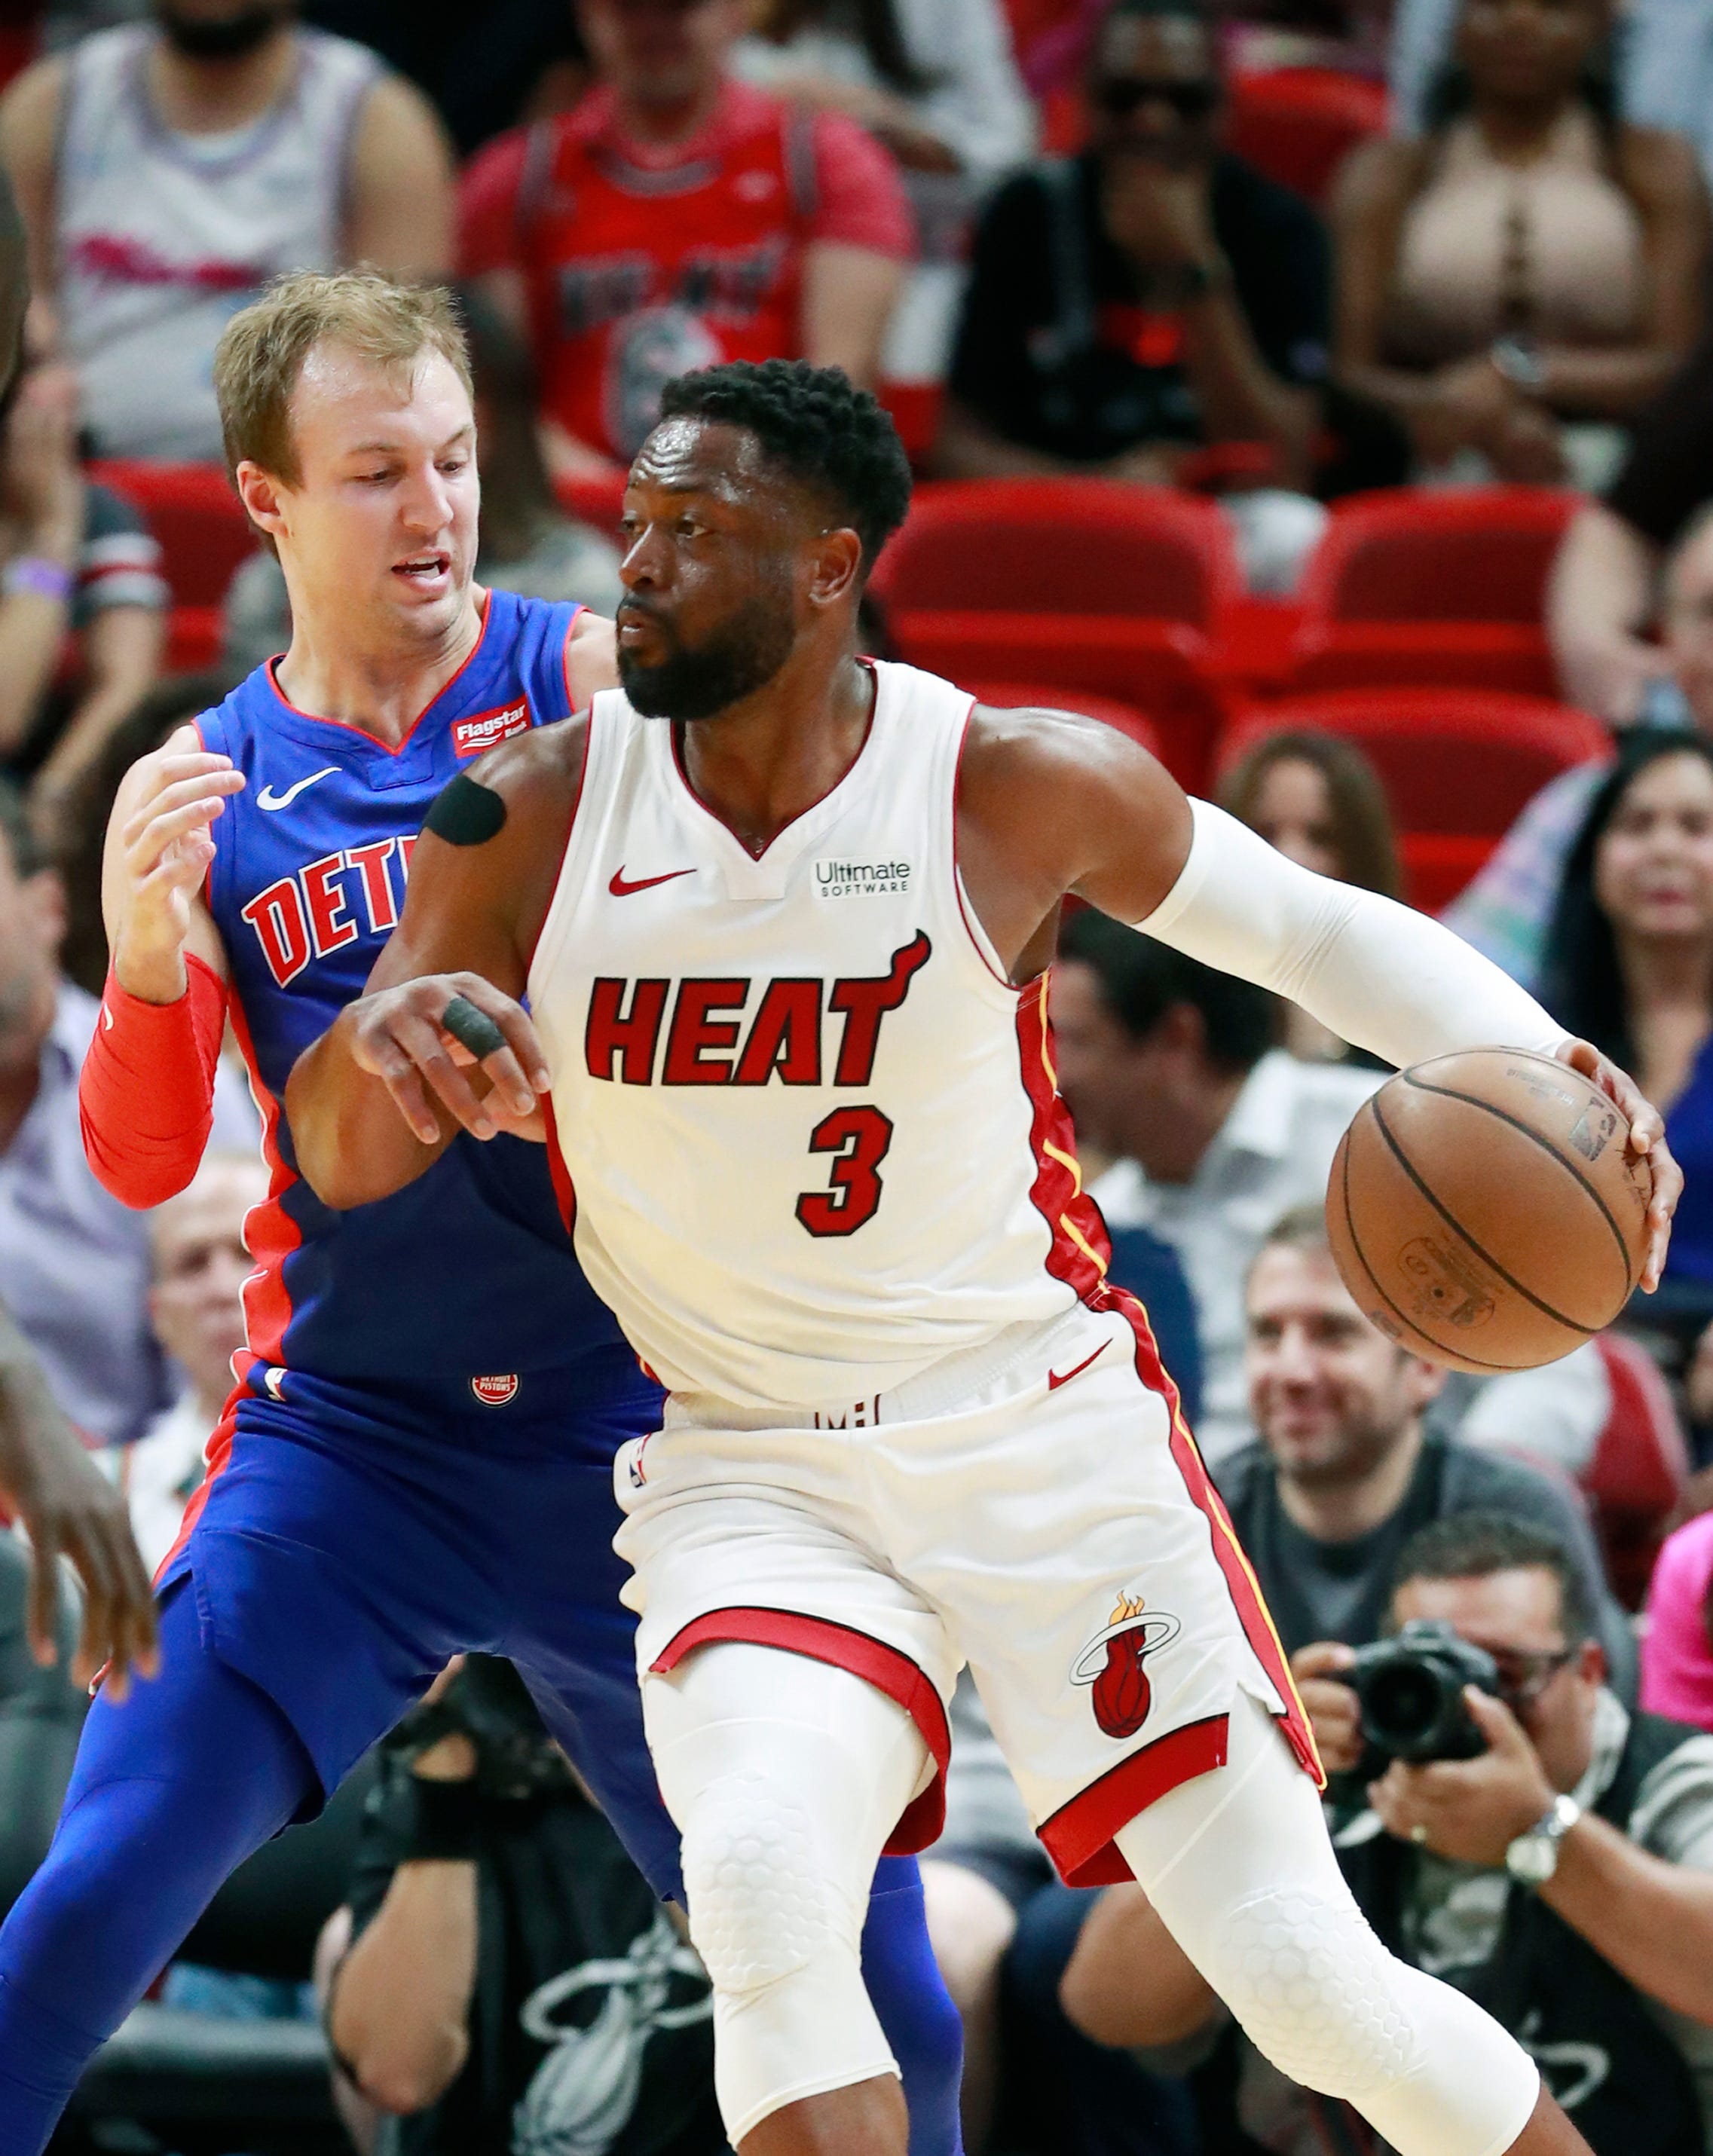 Miami Heat guard Dwyane Wade (3) drives against Detroit Pistons guard Luke Kennard during the first half on Wednesday, March 13, 2019, in Miami, Florida.